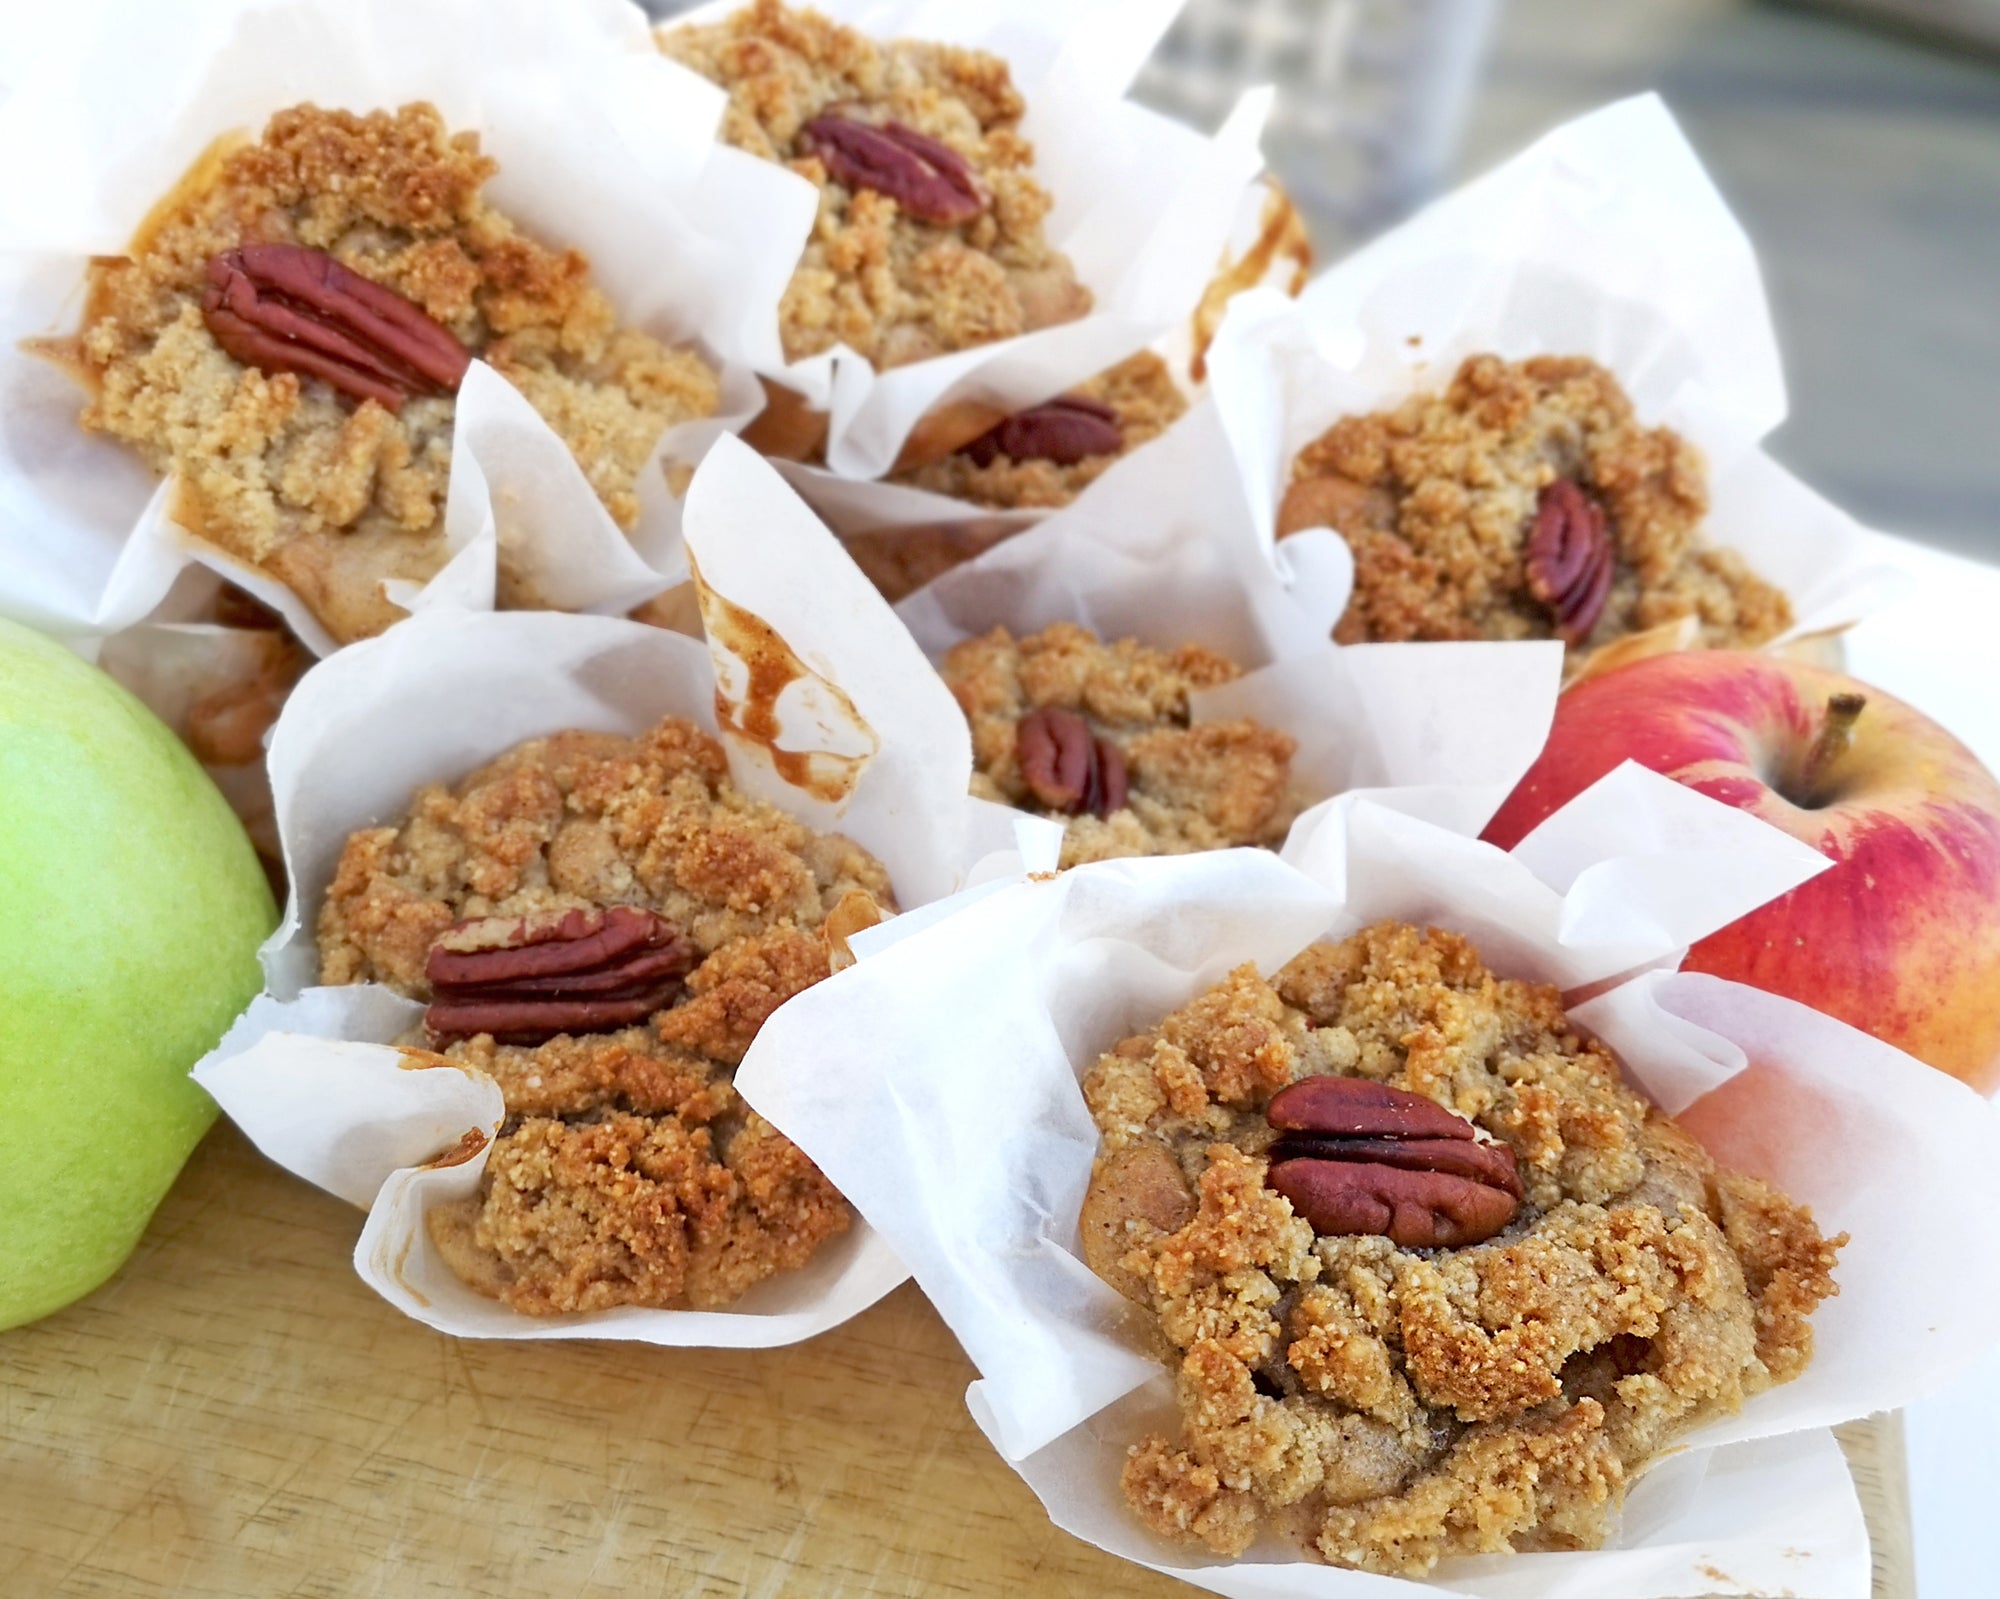 Gluten Free Apple & Cinnamon Muffin with Crumble Topping Recipe